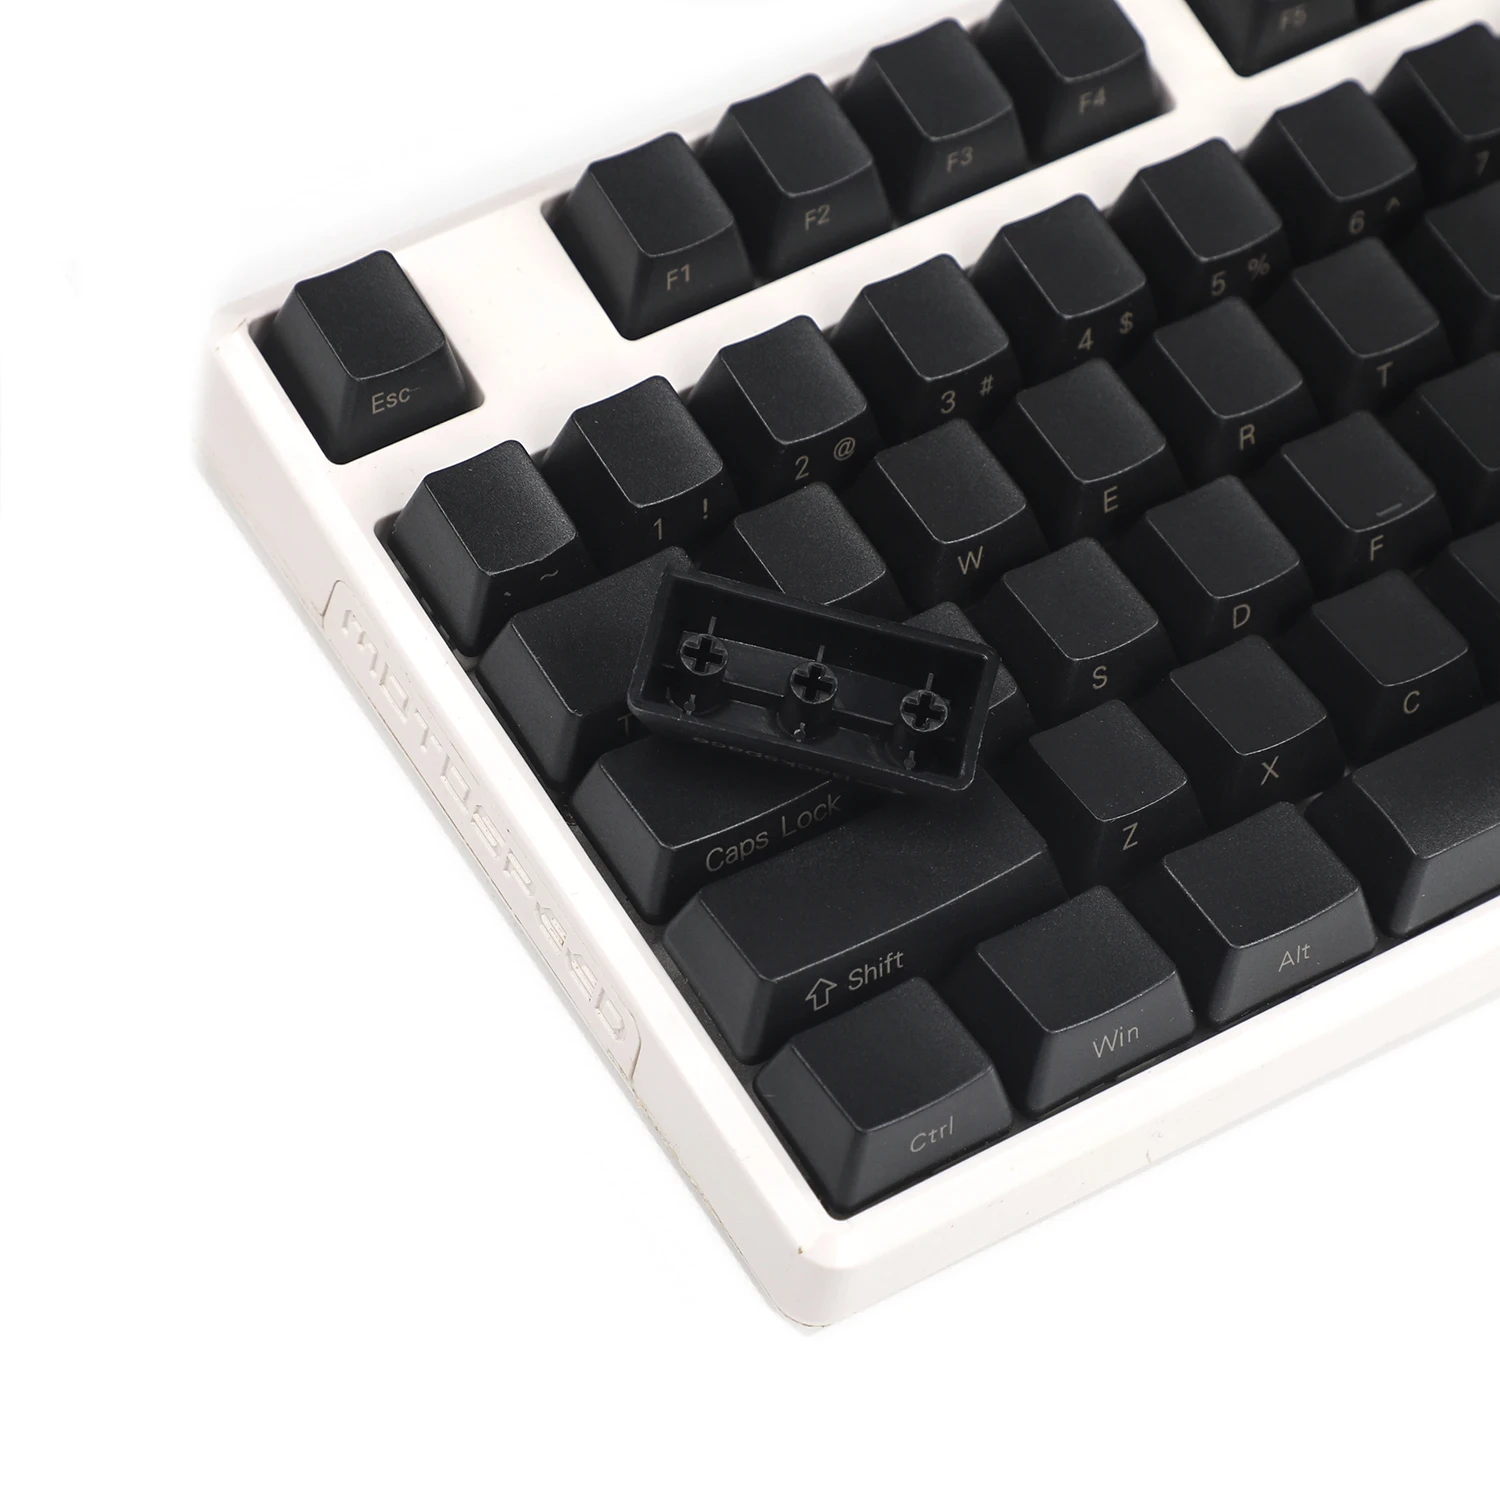 YMDK Thick PBT Dolch OEM Profile Russian Keycap Keyset Suitable For Steelseries 6GV2 7G 5 - Pudding Keycap